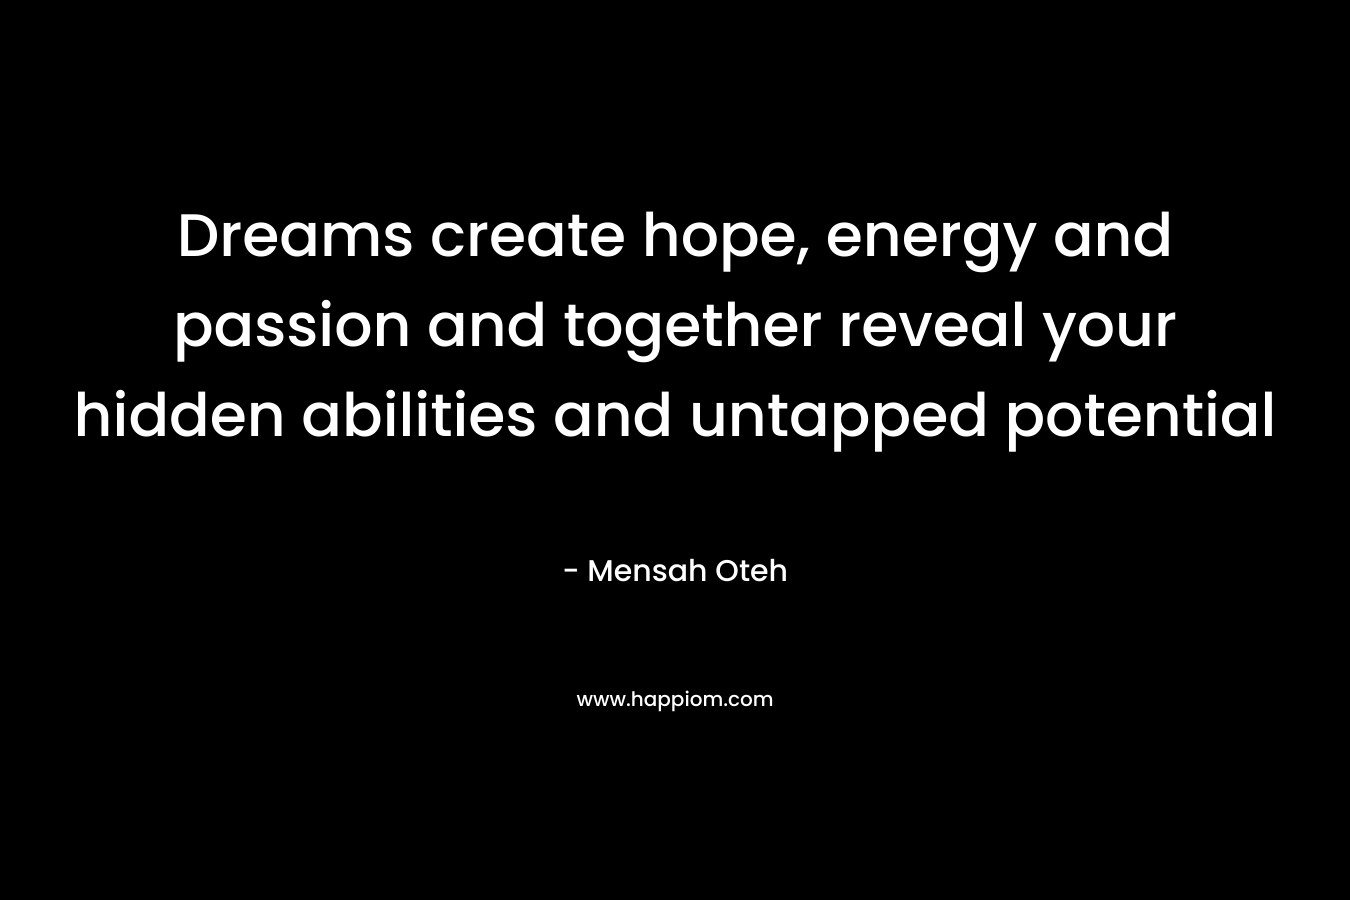 Dreams create hope, energy and passion and together reveal your hidden abilities and untapped potential